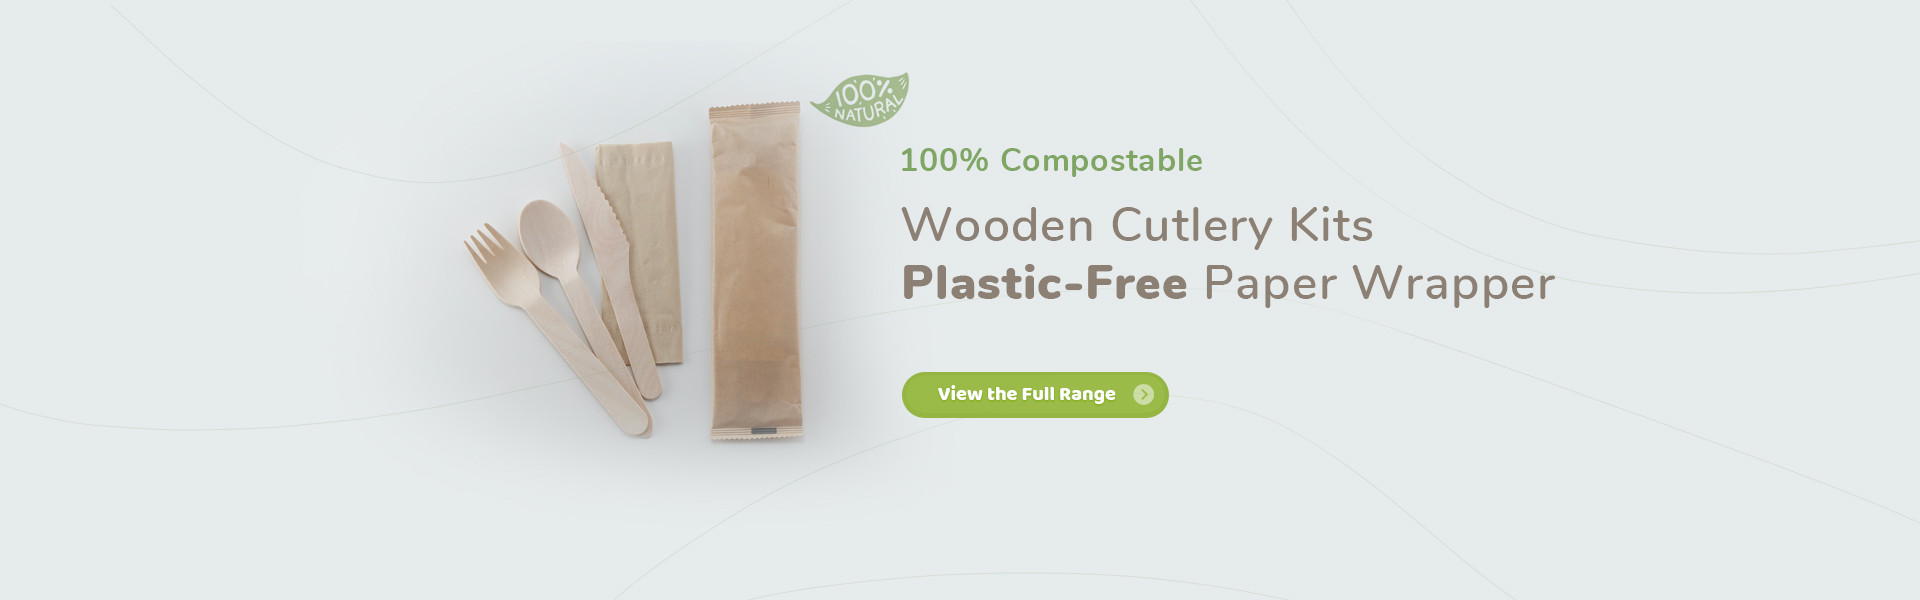 100% Compostable Wooden Cutlery Set 